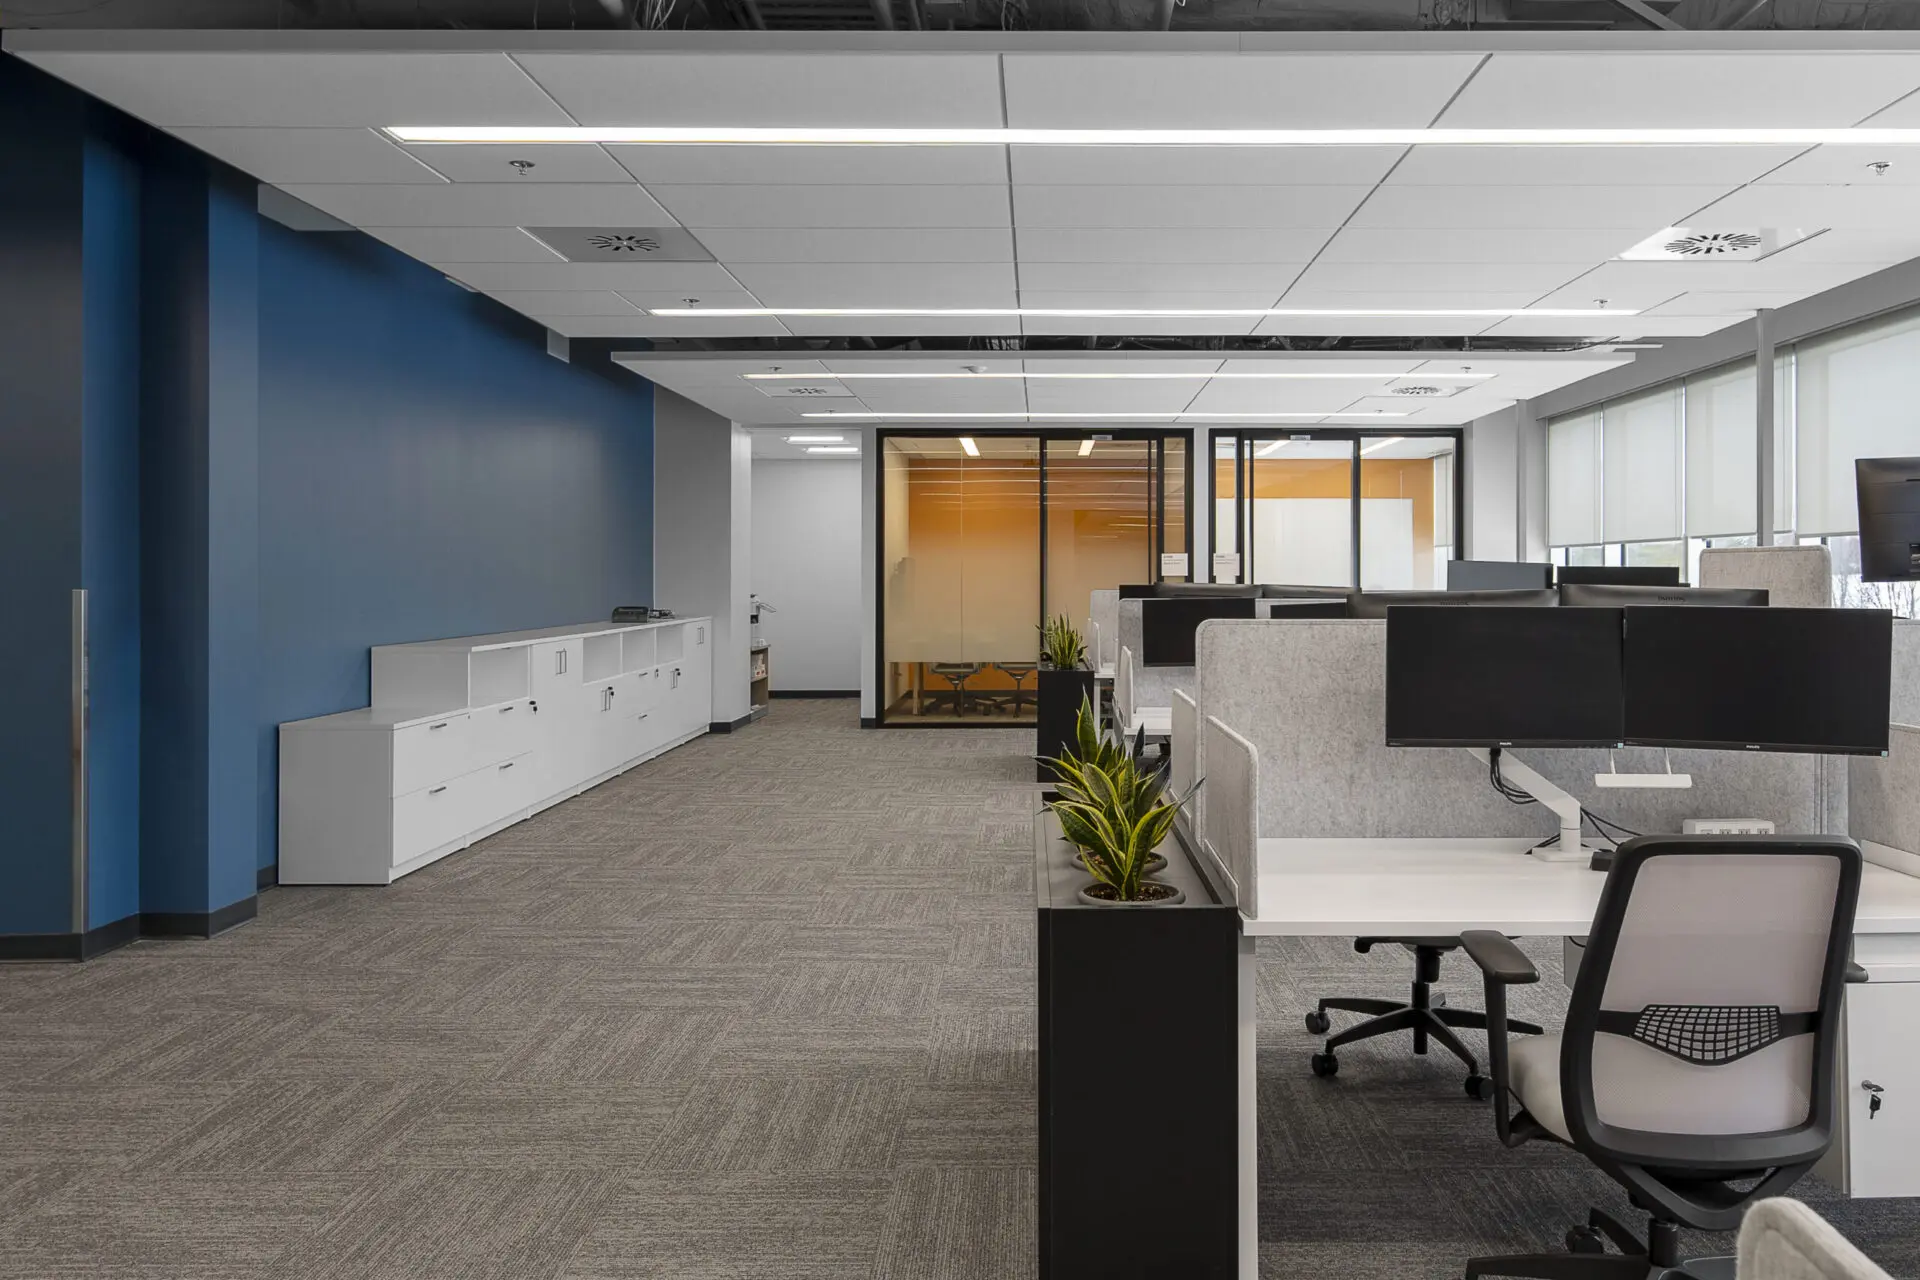 An open office with blue walls and desks designed for engineering and architecture professionals.